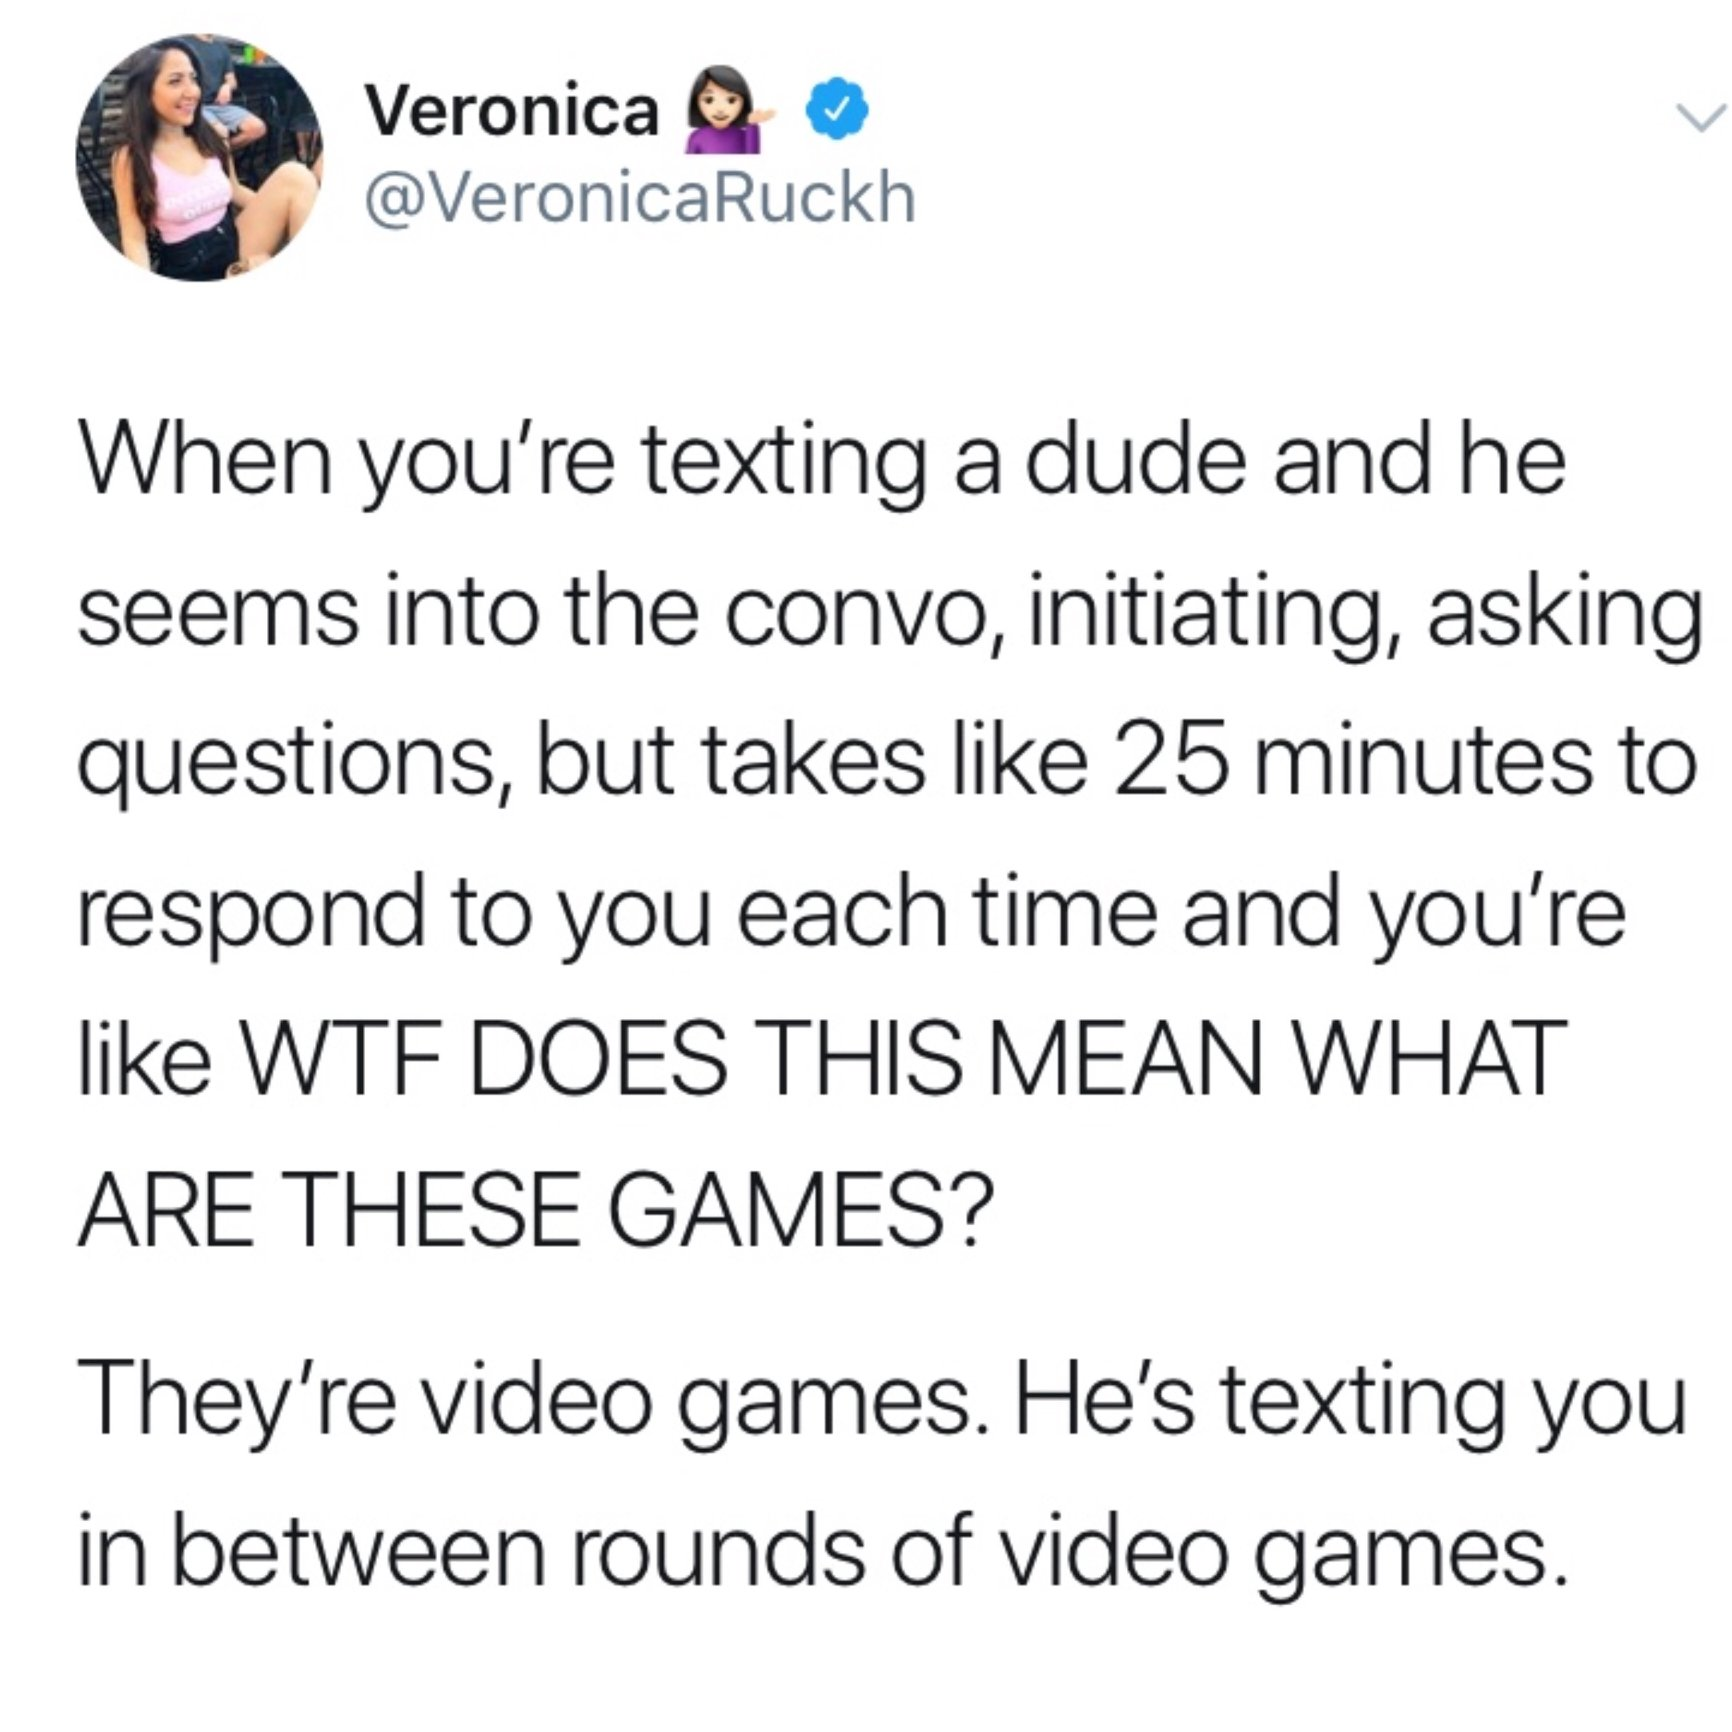 document - Veronica When you're texting a dude and he seems into the convo, initiating, asking questions, but takes 25 minutes to respond to you each time and you're Wtf Does This Mean What Are These Games? They're video games. He's texting you in between